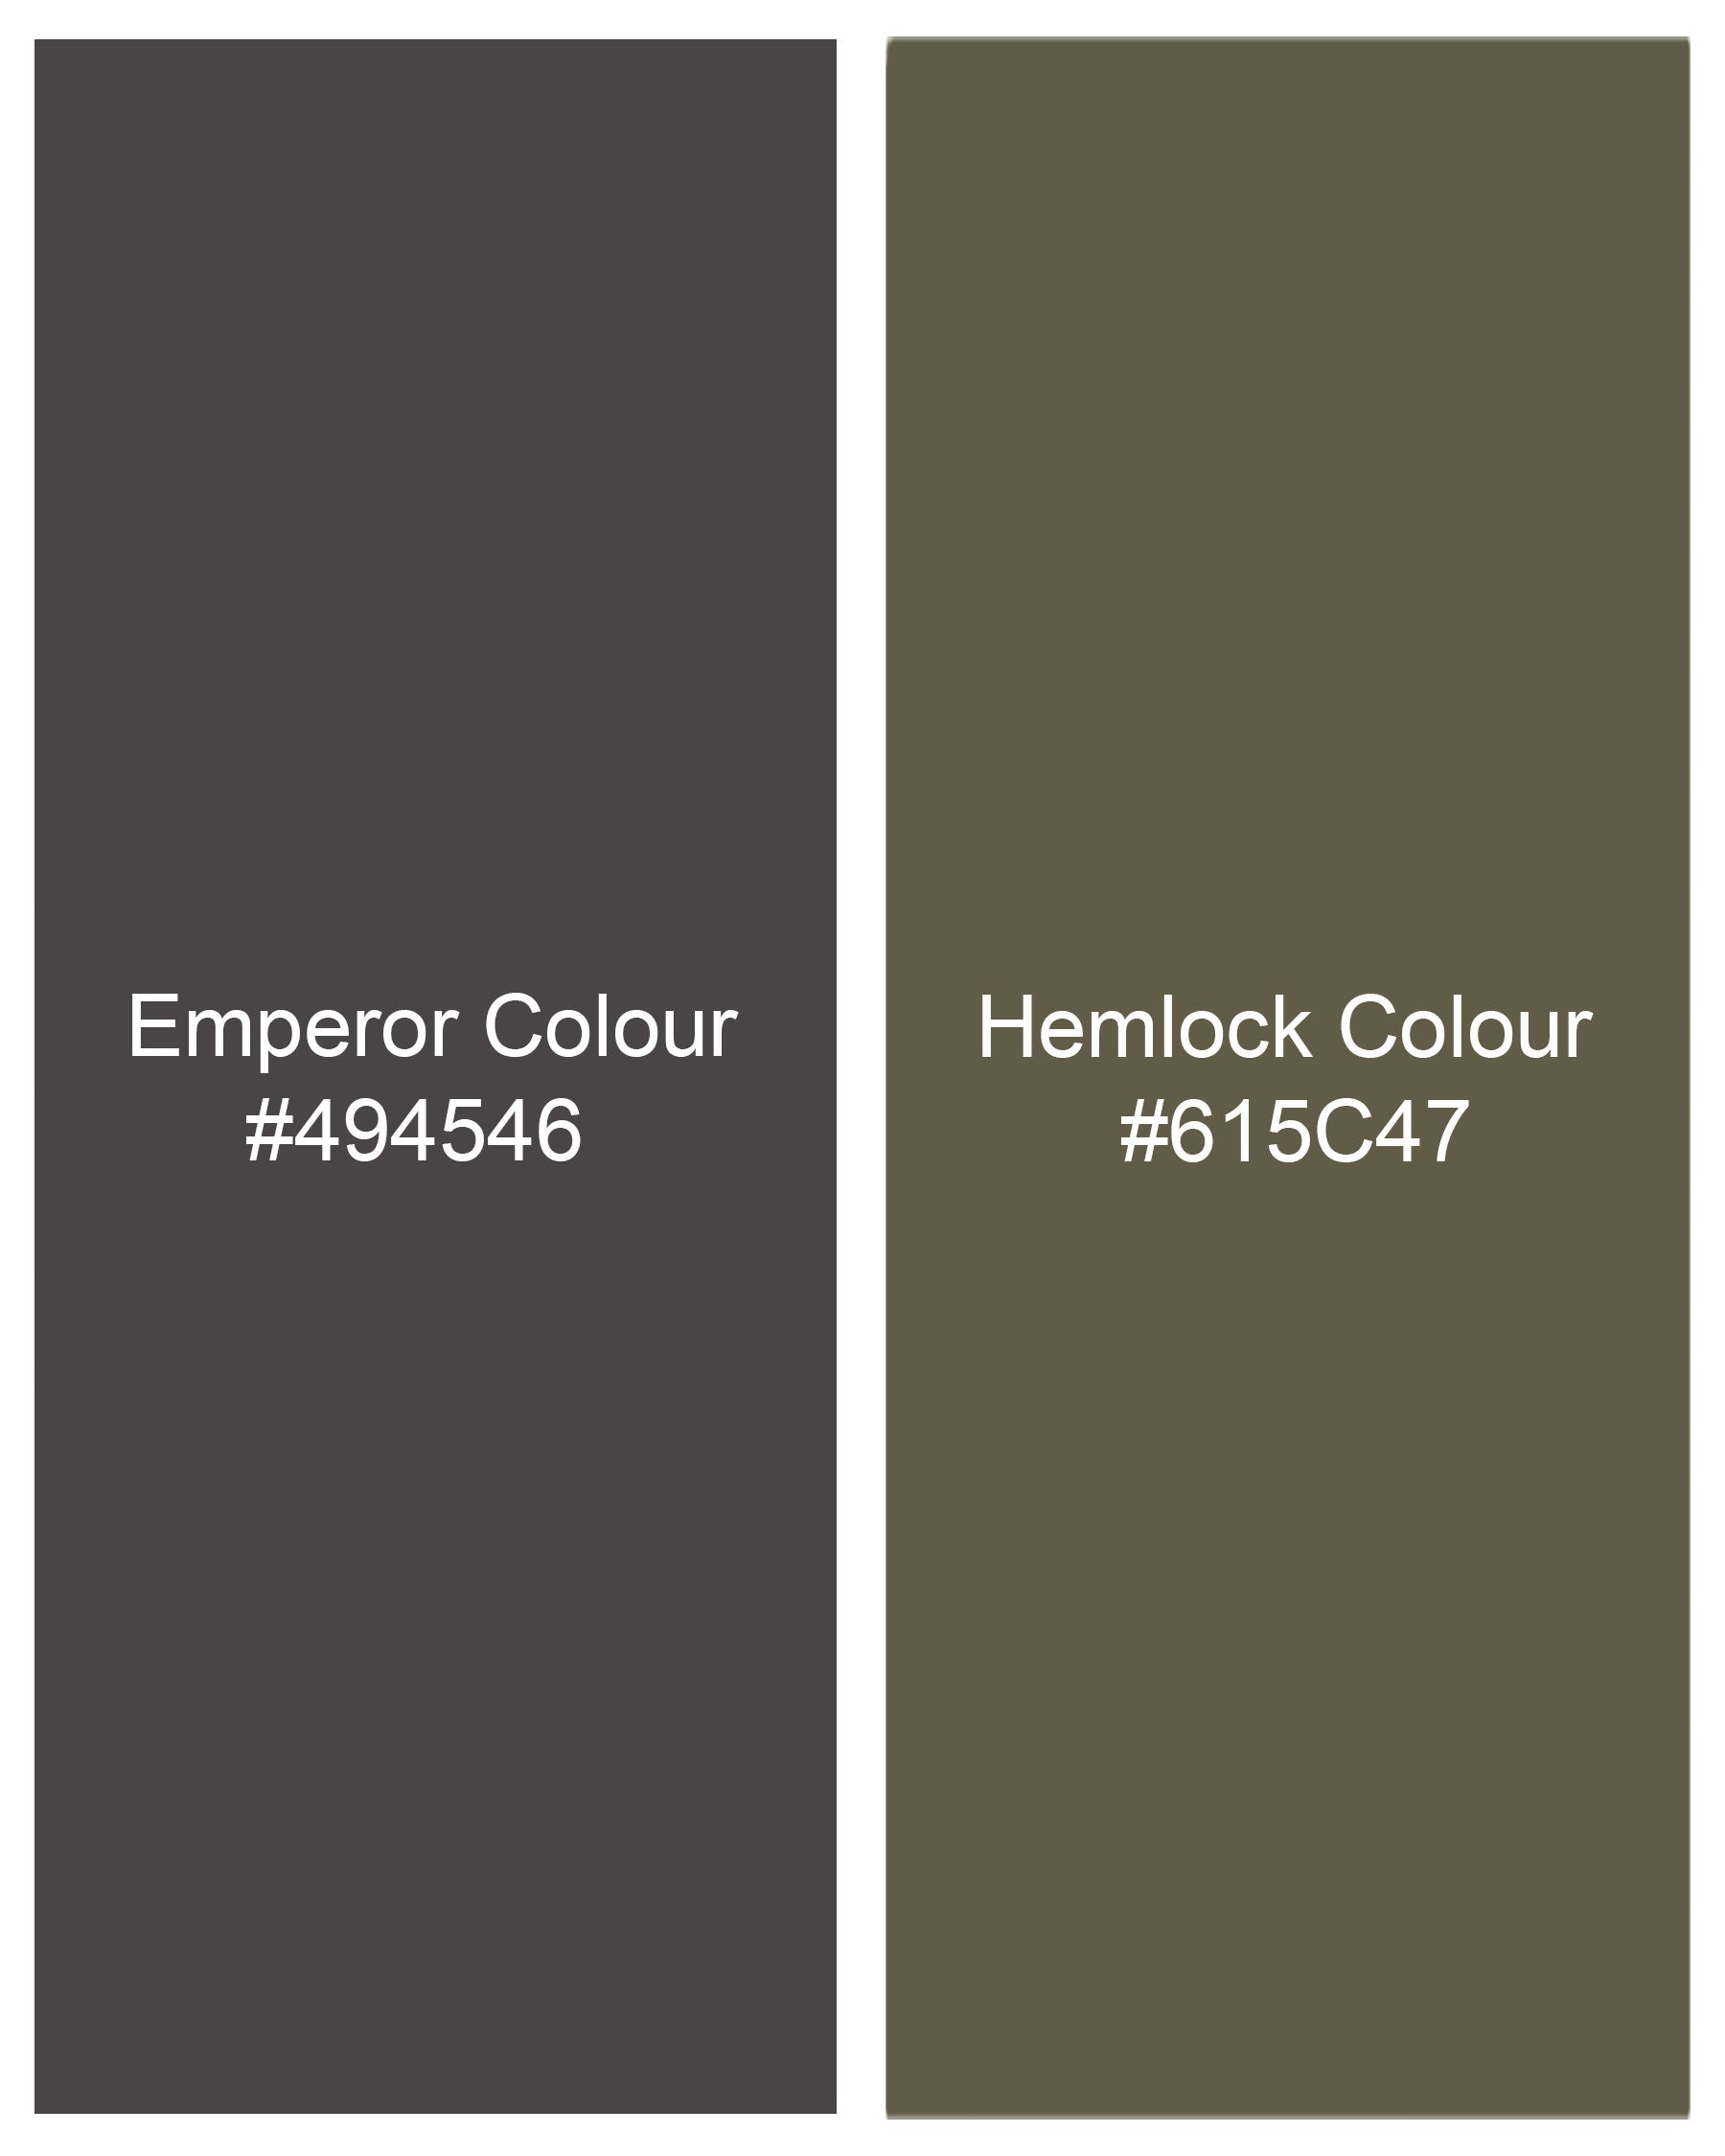 Emperor Gray with Hemlock Dark Brown Checkered Pant T2095-28, T2095-30, T2095-32, T2095-34, T2095-36, T2095-38, T2095-40, T2095-42, T2095-44